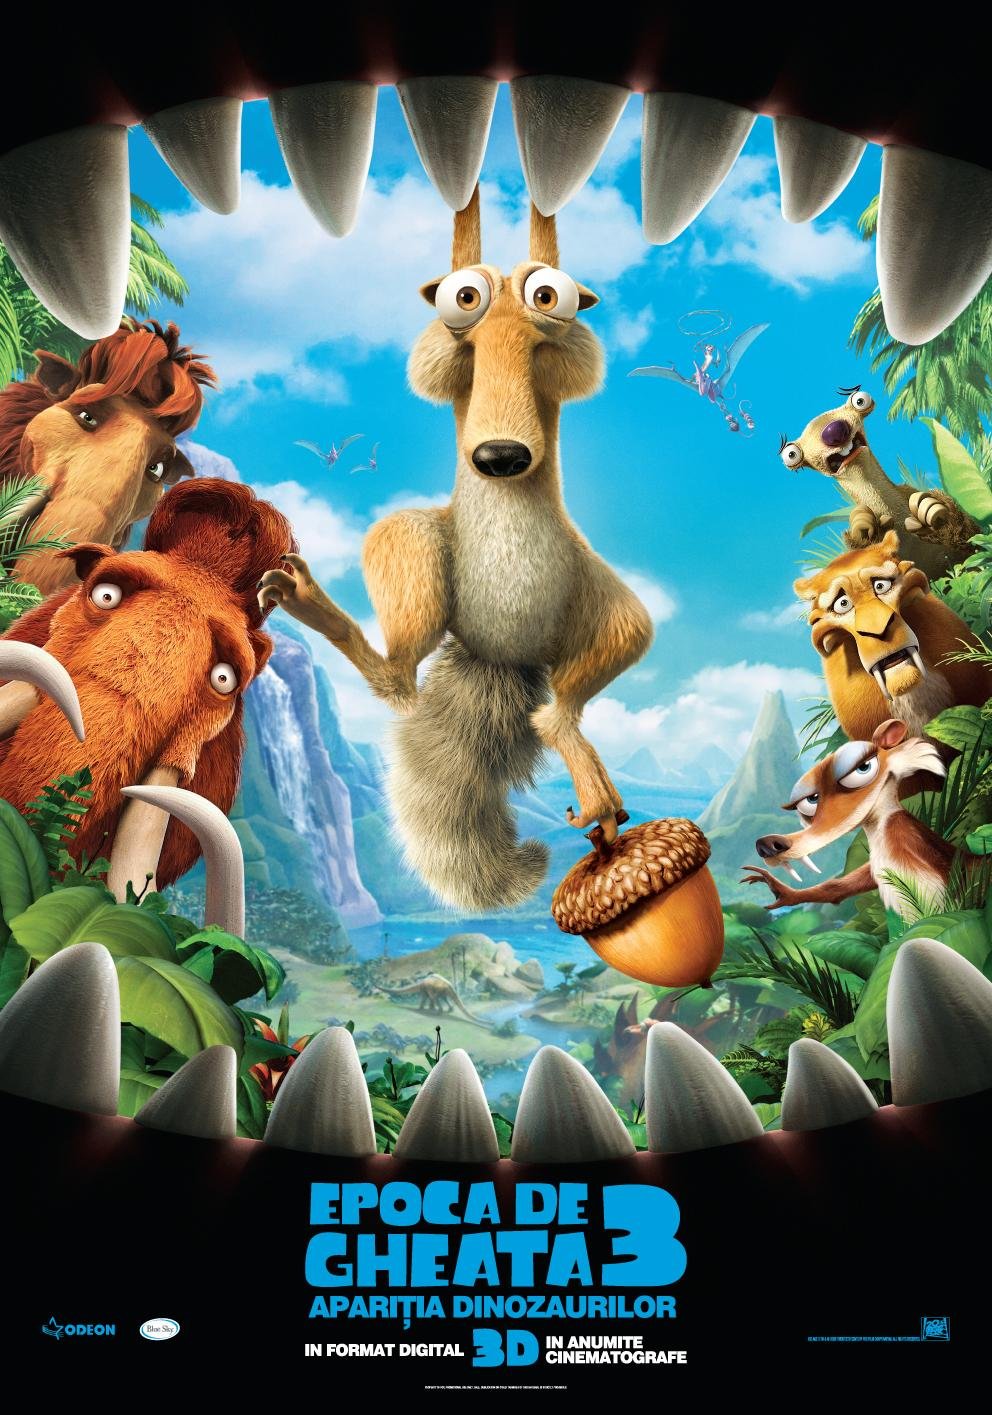 Ice Age: Dawn of the Dinosaurs download the new version for windows